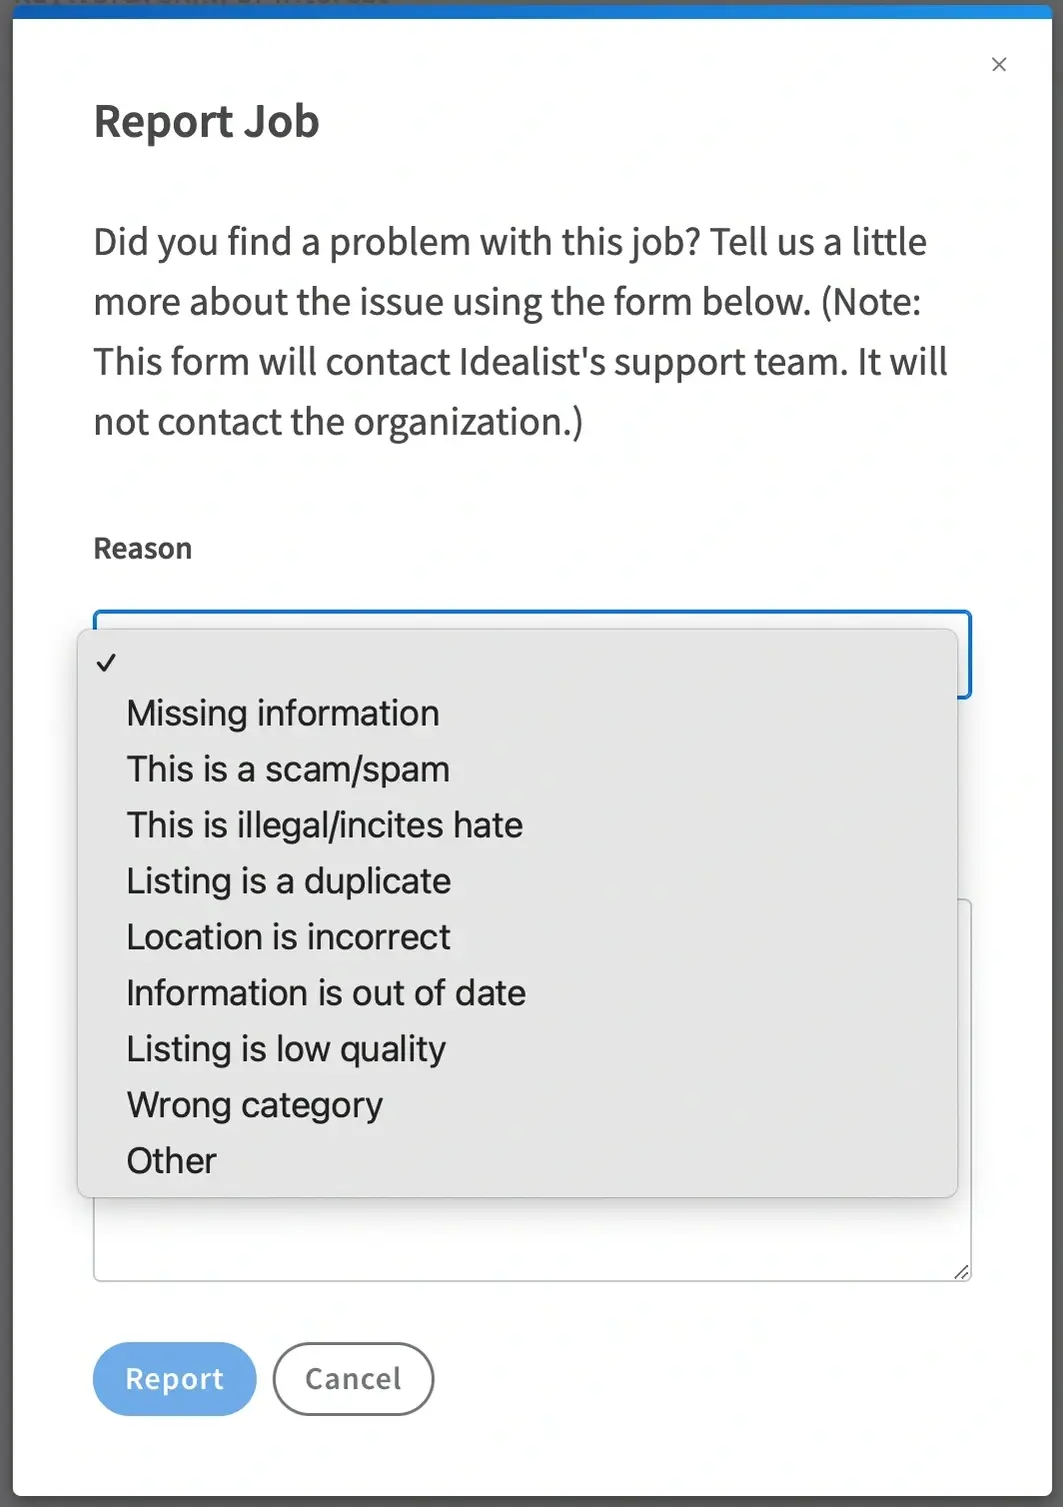 Screenshot of the Idealist website showing the dropdown menu to choose the Reason for reporting